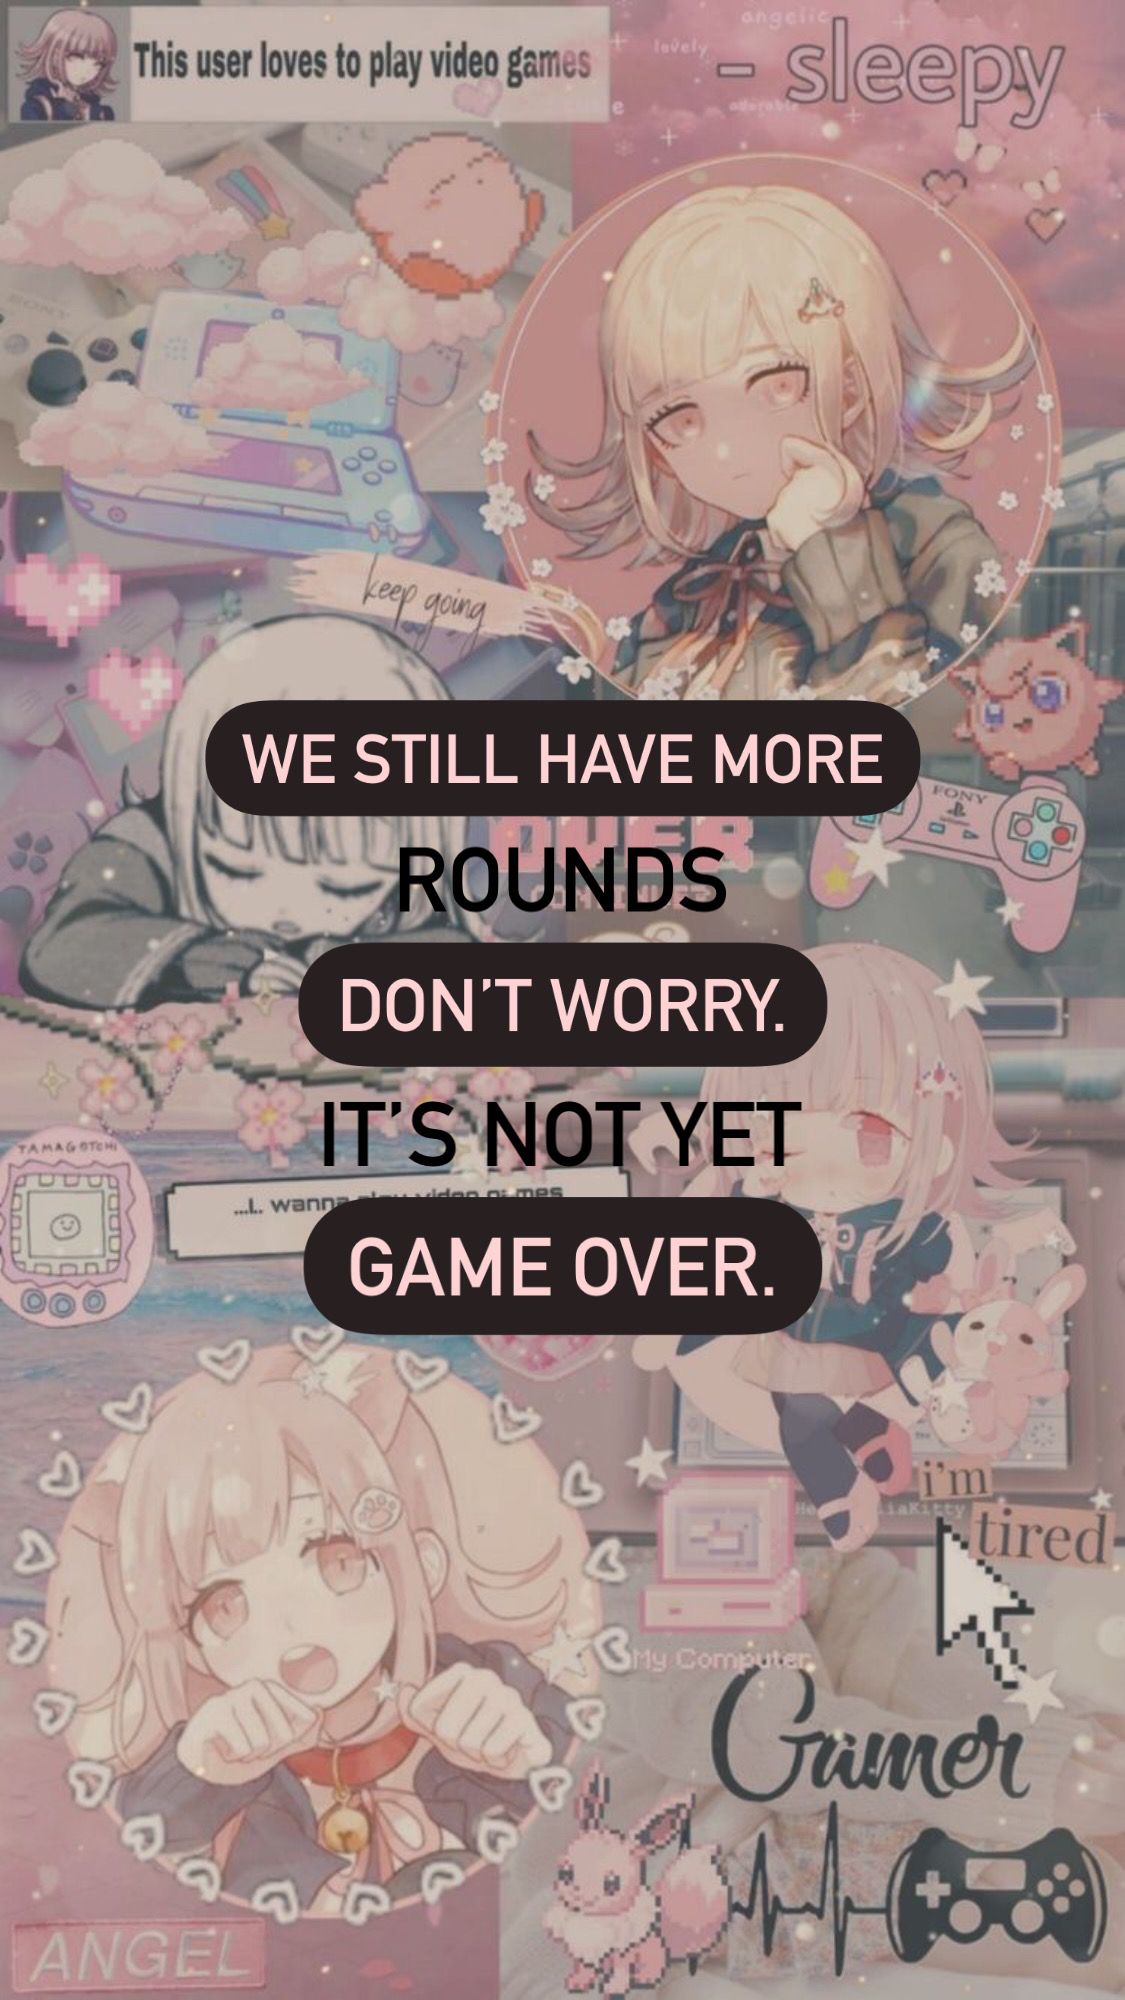 We still have more rounds. Don't worry. It's not yet game over.”. Nanami chiaki, Danganronpa, Nanami